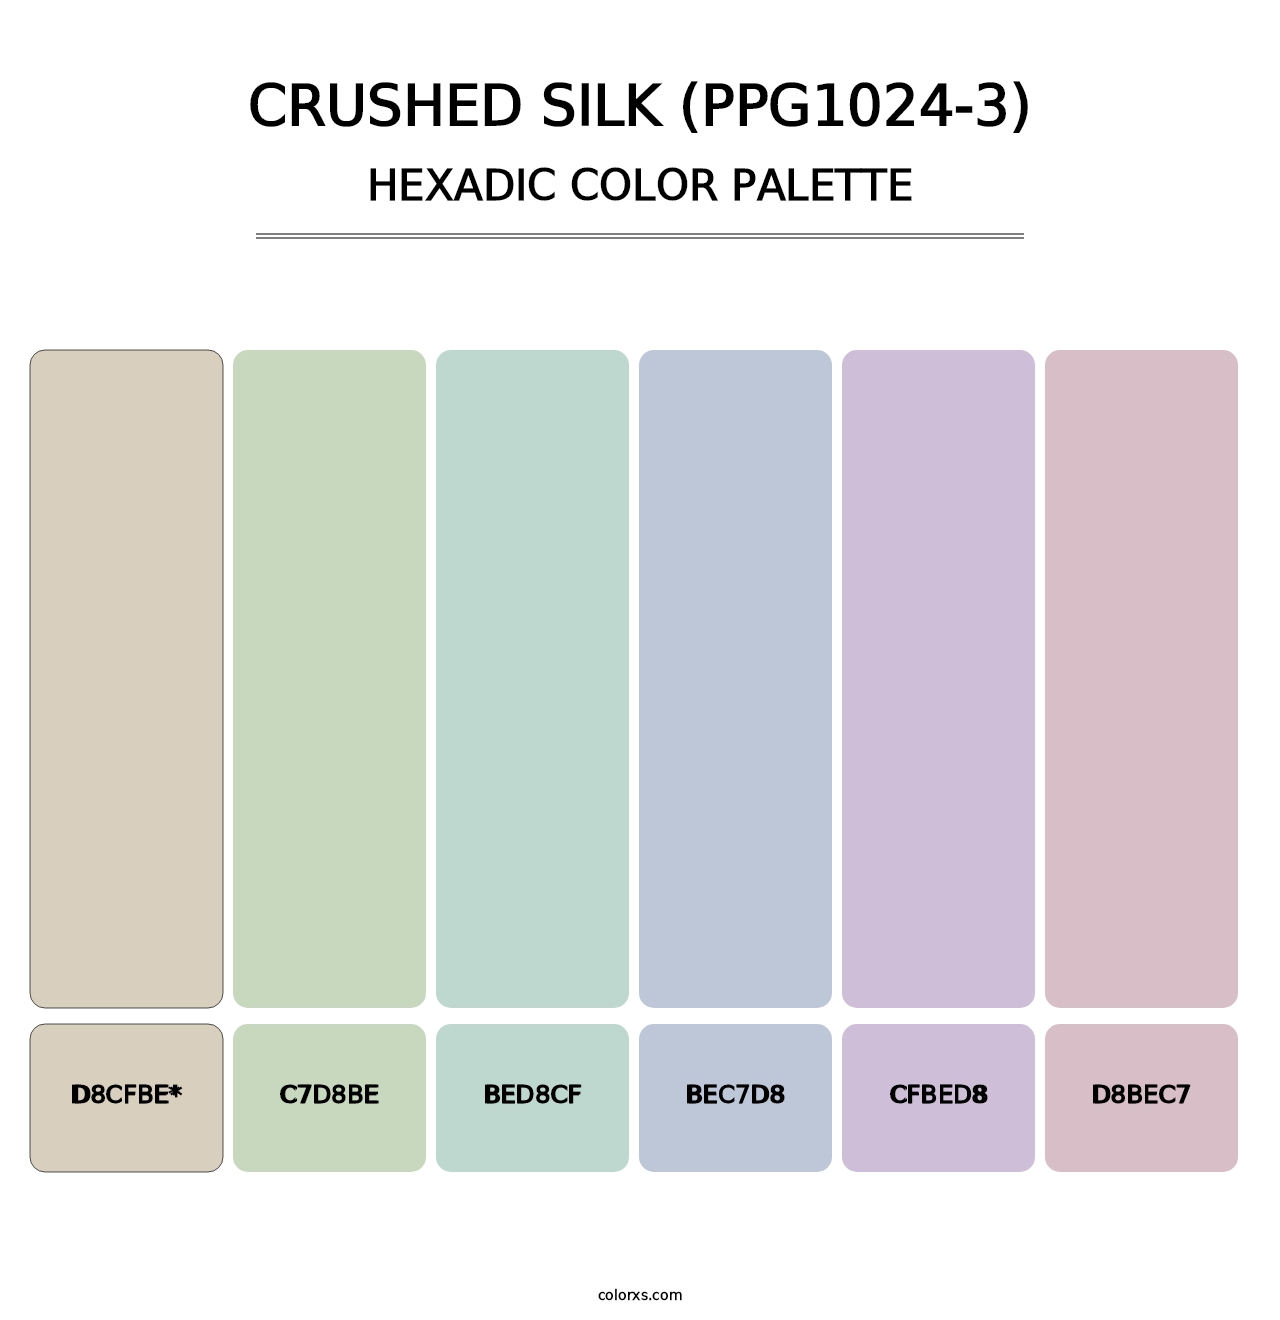 Crushed Silk (PPG1024-3) - Hexadic Color Palette